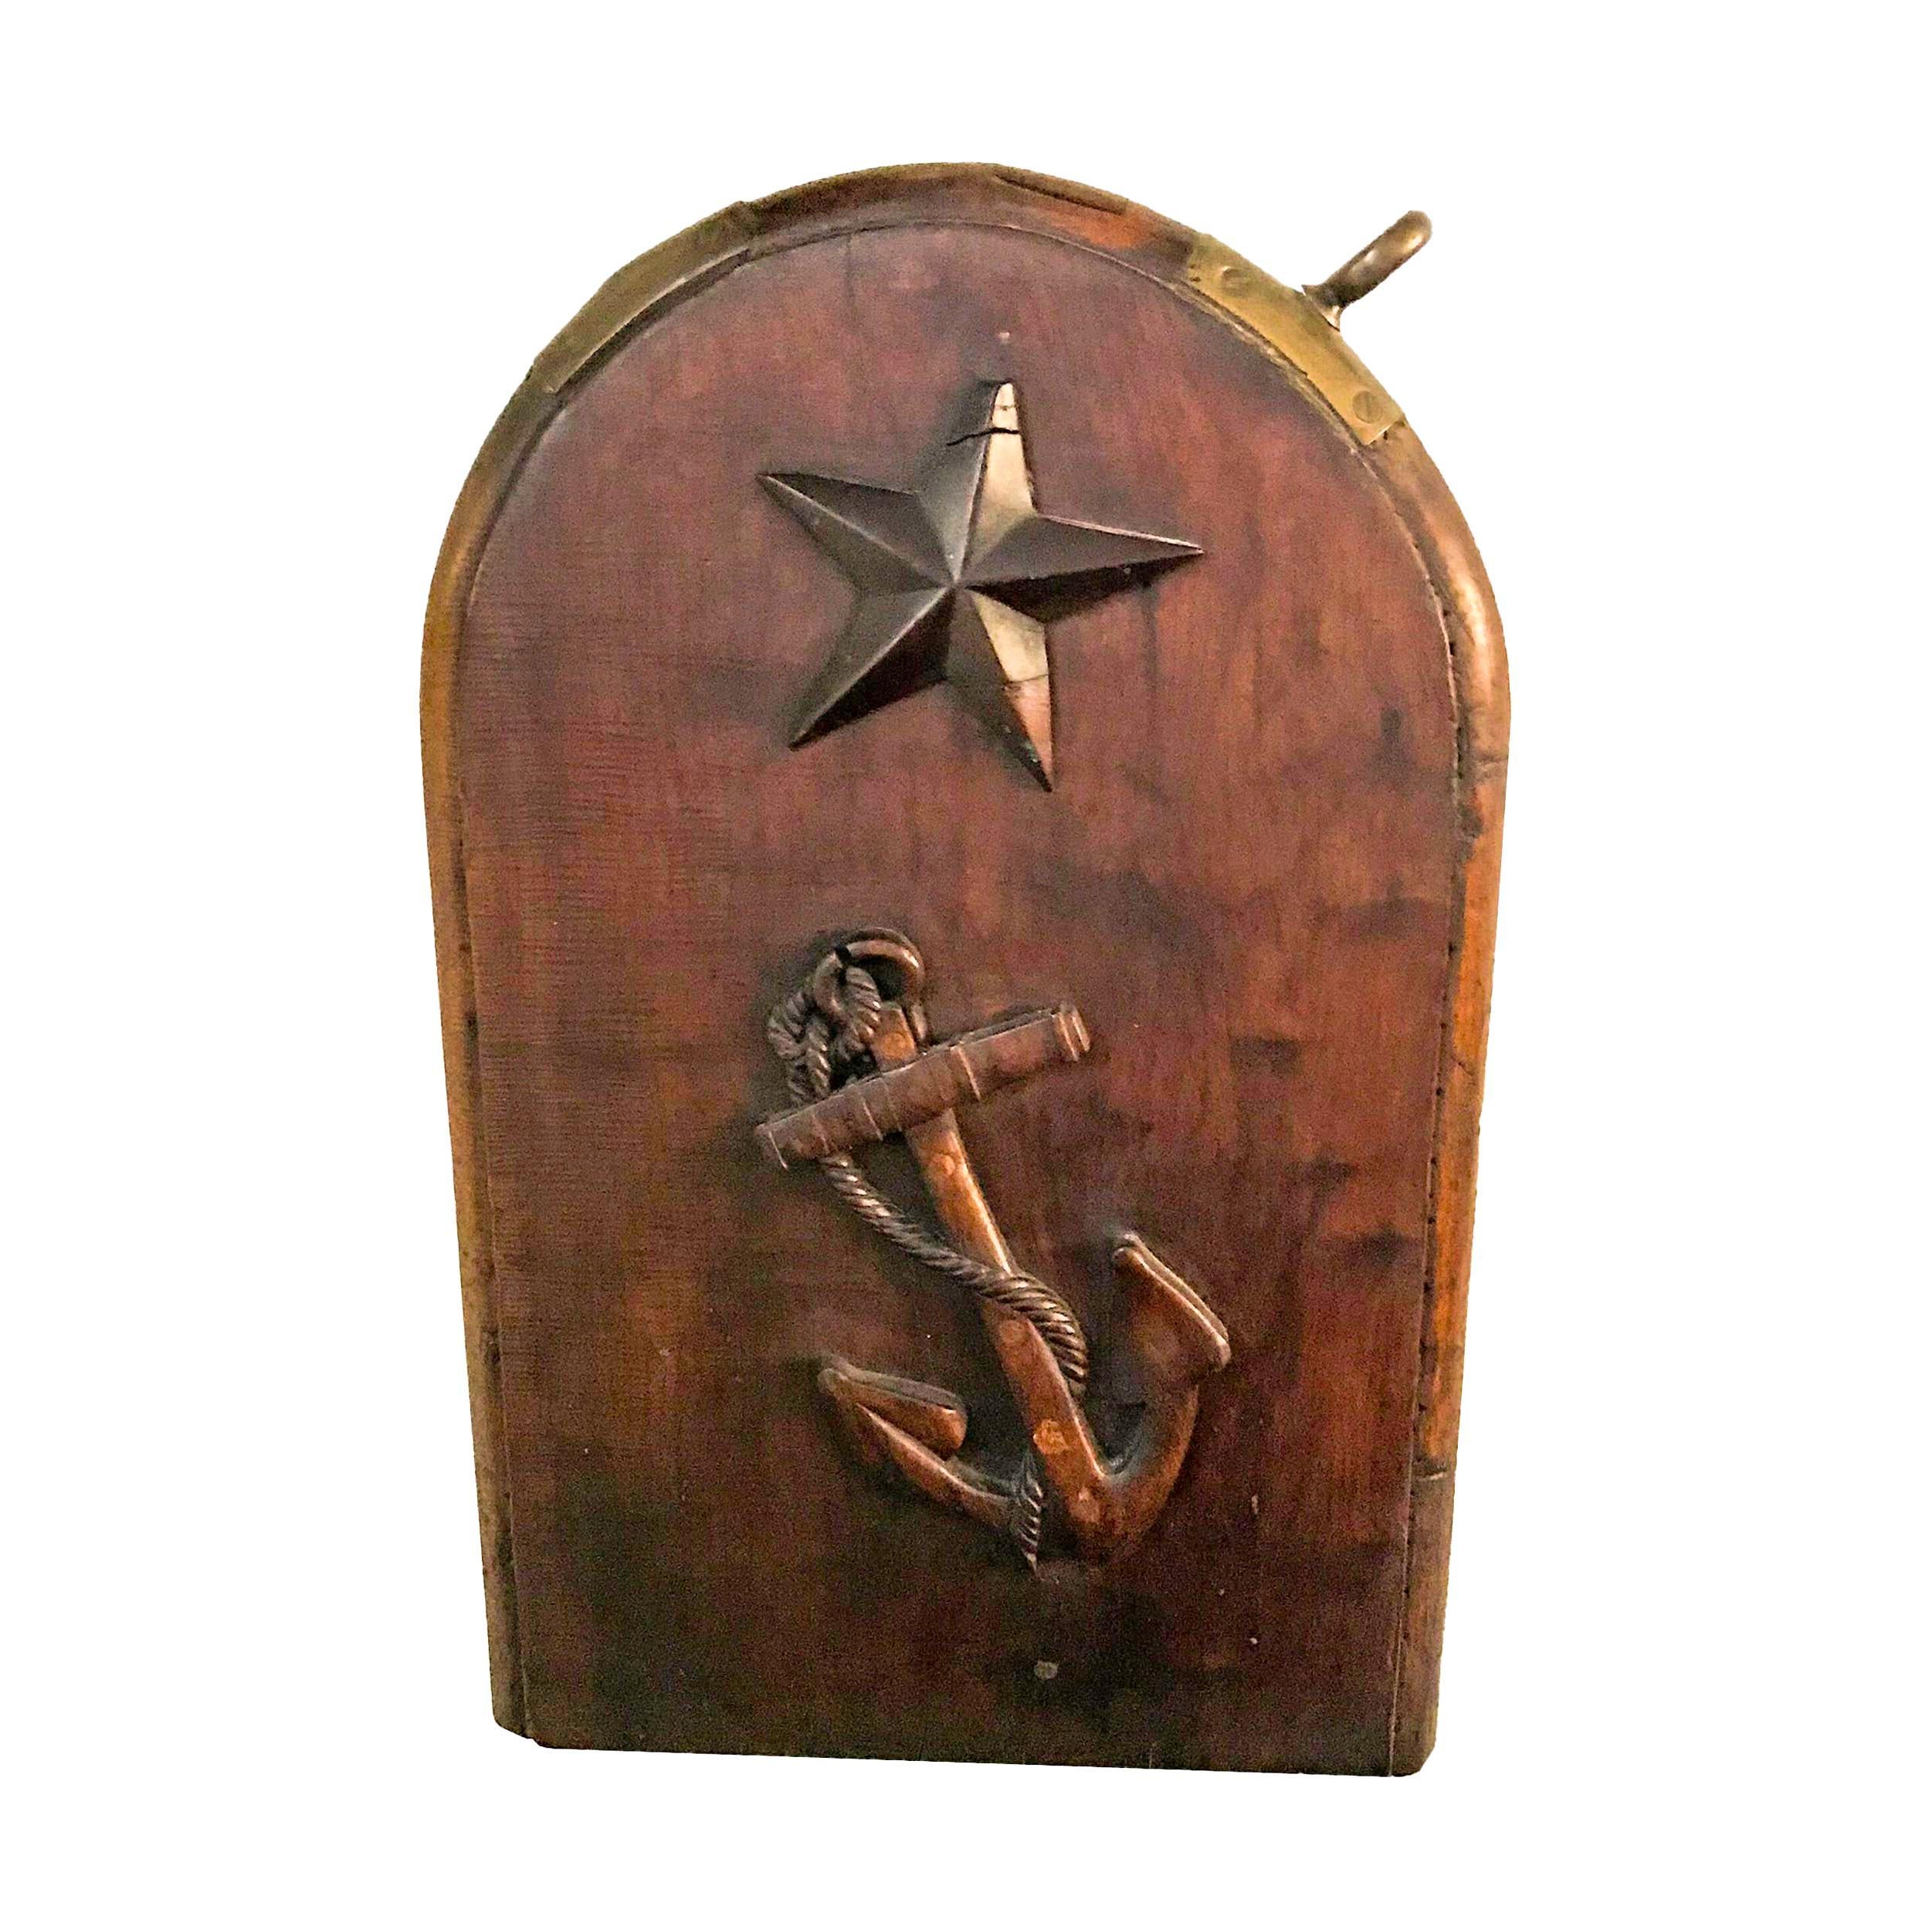 Made of walnut and having their original brass mounts and suspension rings, each having applied carvings of stars and fouled anchors. Old minor repairs to some of the sides, American, circa 1840-1860.
Measures: 33” x 21” x 3 ¾”.
 